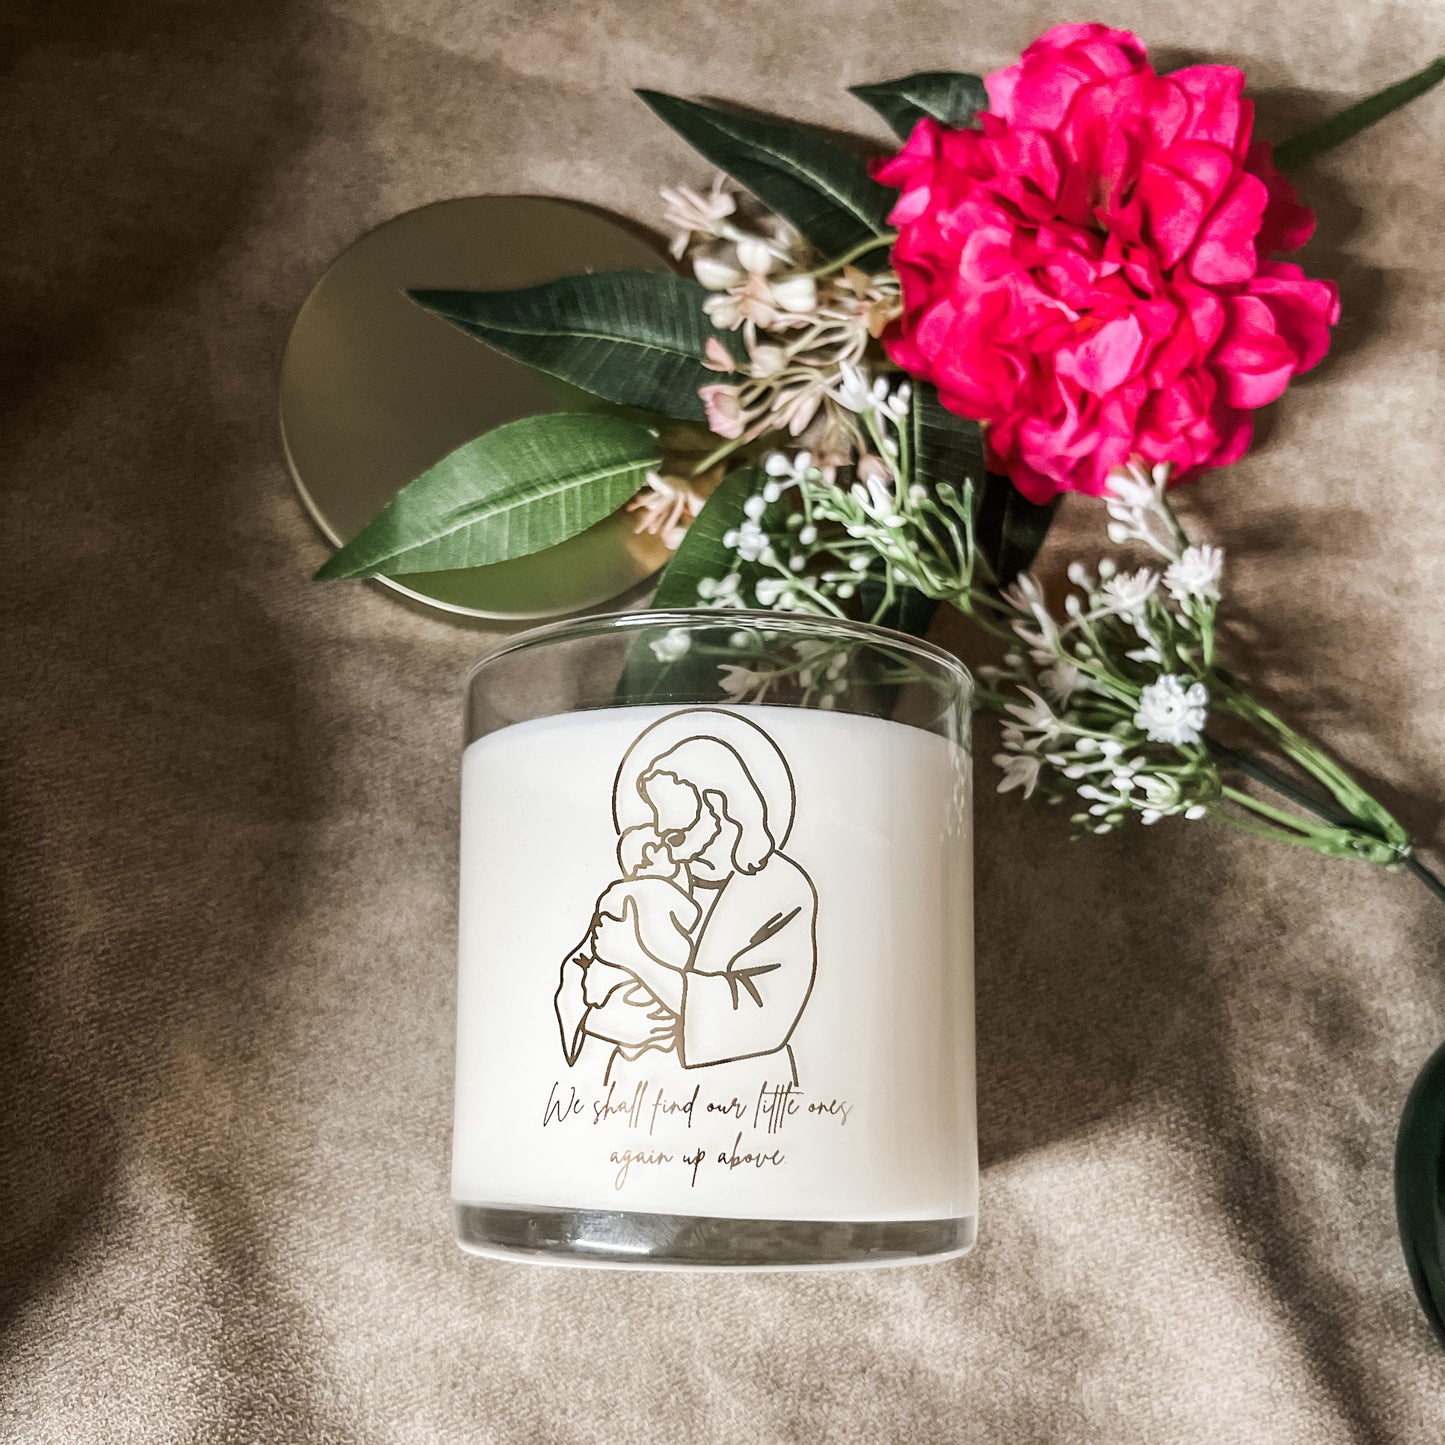 Infant Loss/ Miscarriage Candle Saint Zelie Martin “We Shall Find Our Little Ones Again Up Above”